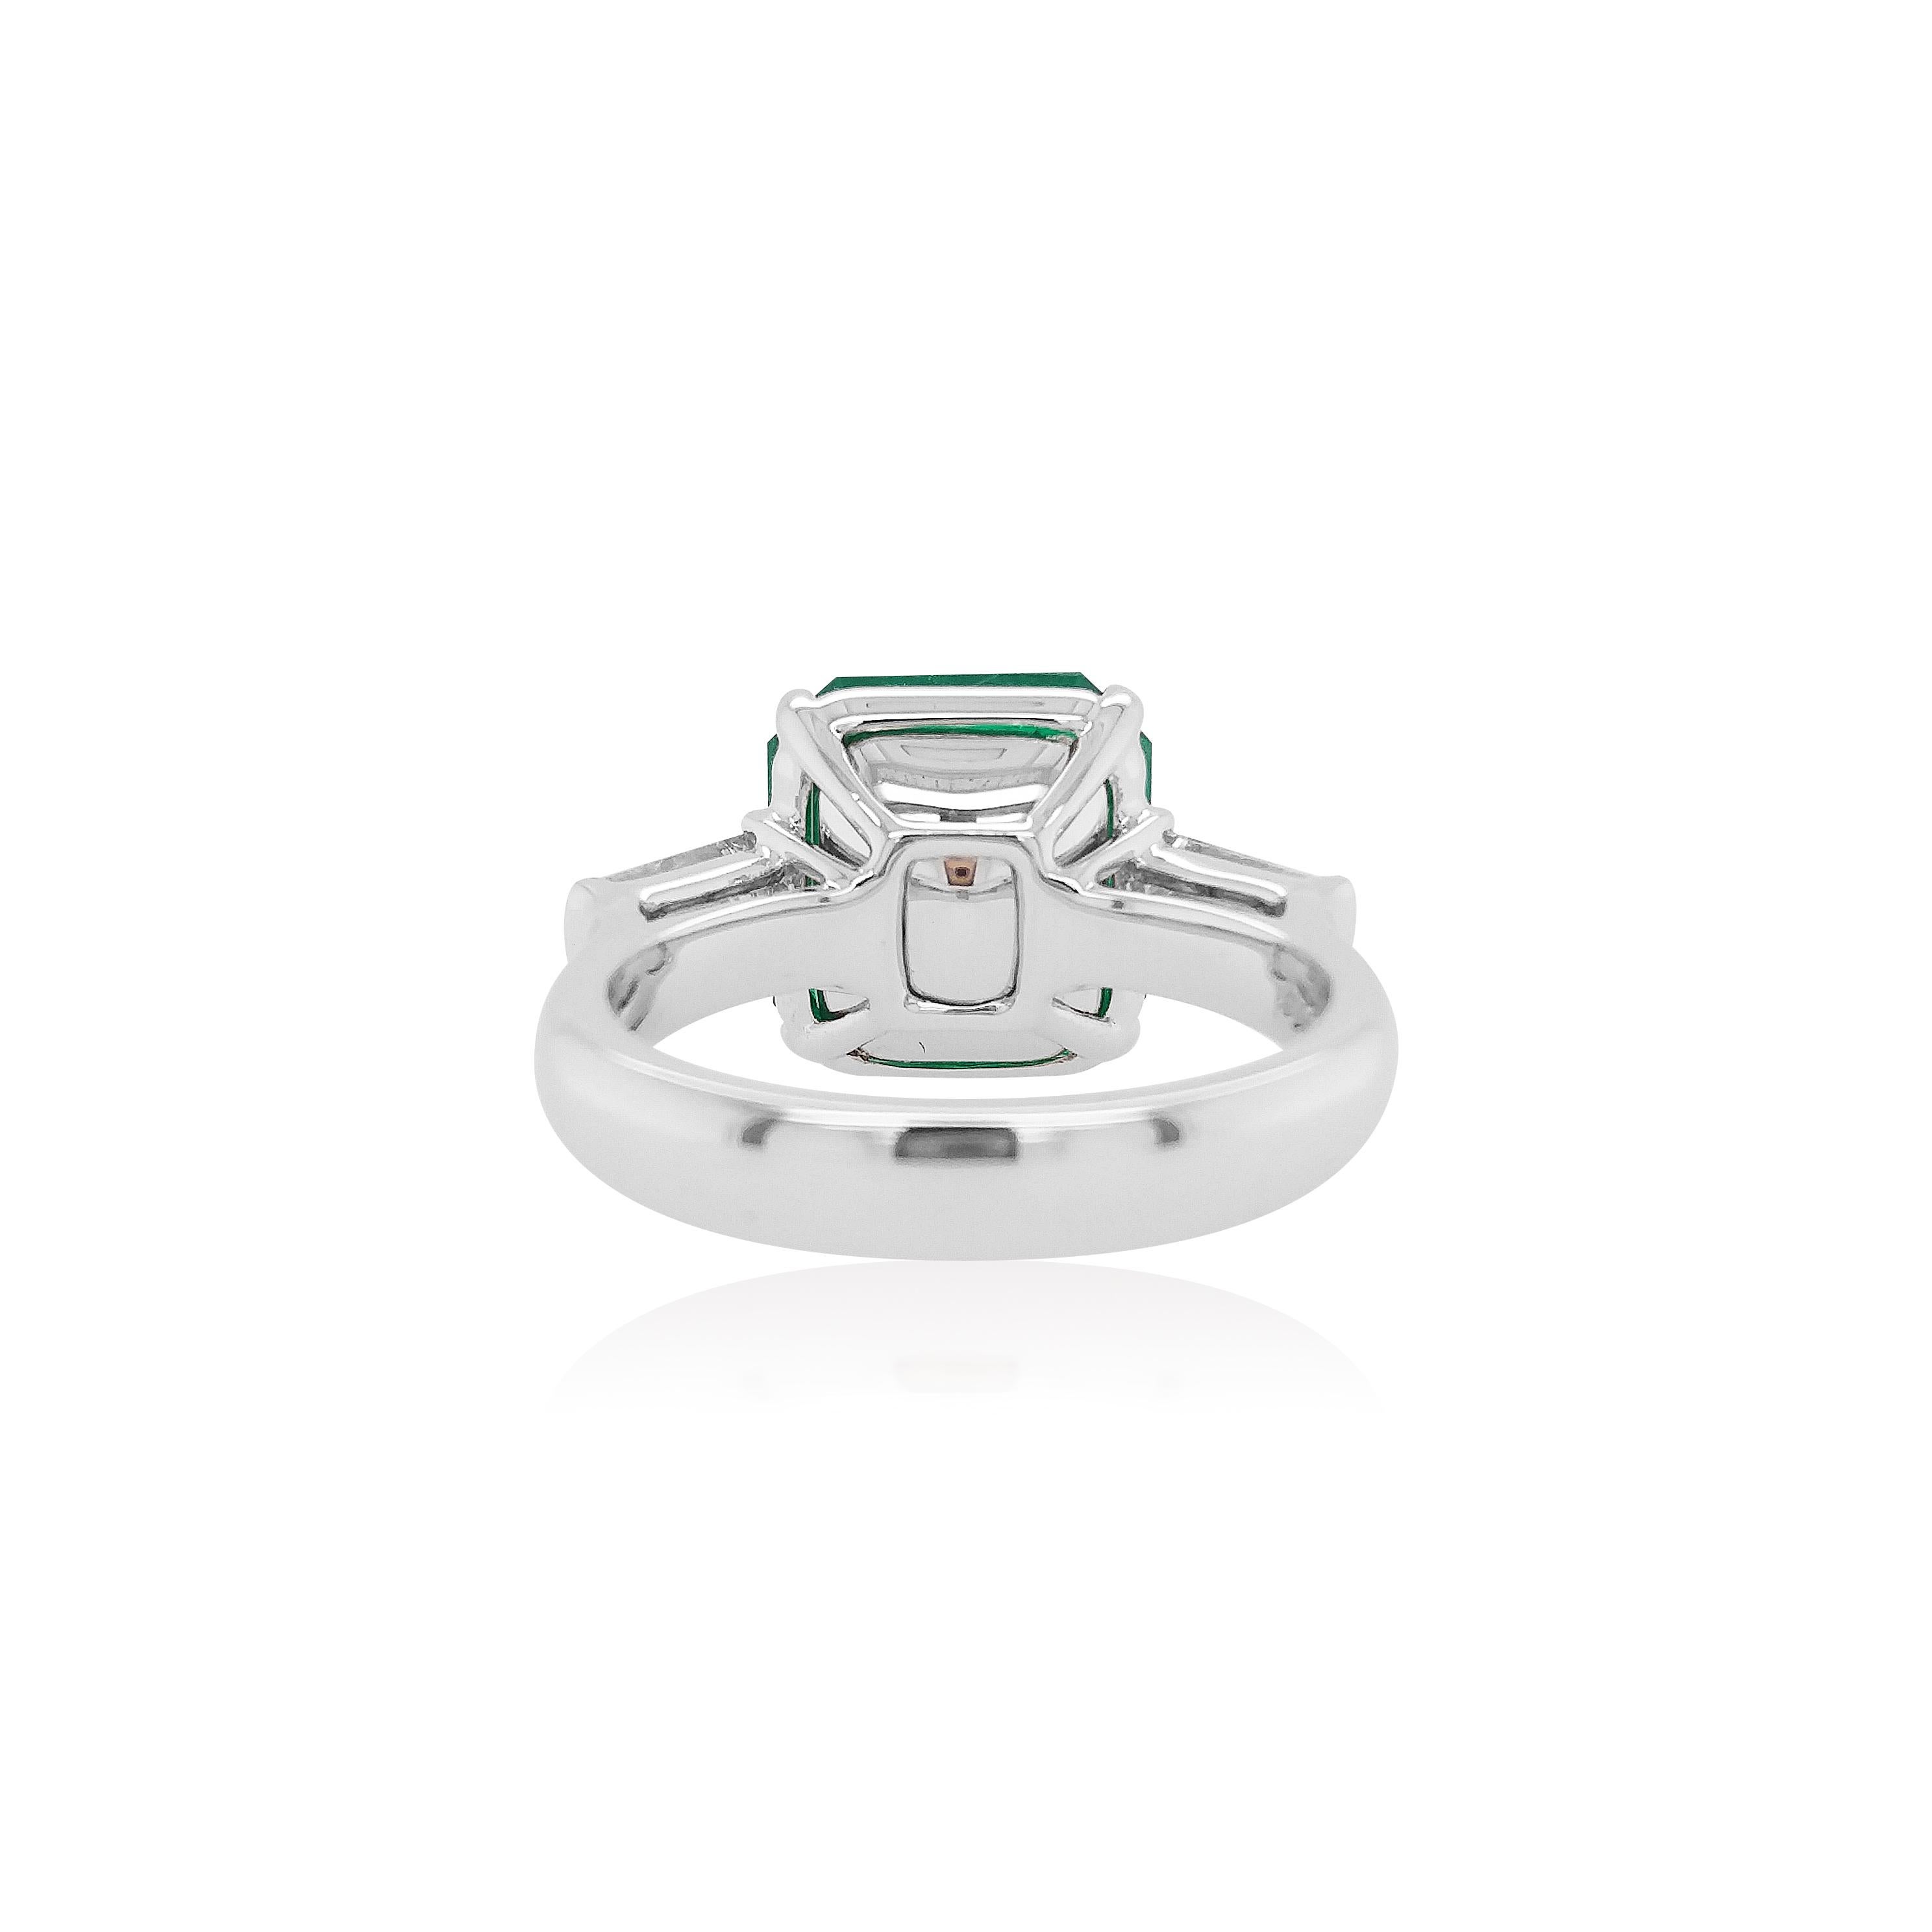 This striking ring features an exceptional Colombian Emerald at its centre, flanked by two tapered baguette White Diamonds. Set in PT900 platinum to provide a unique, but elegant contrast to the rich color of the Emerald, this piece is truly one of